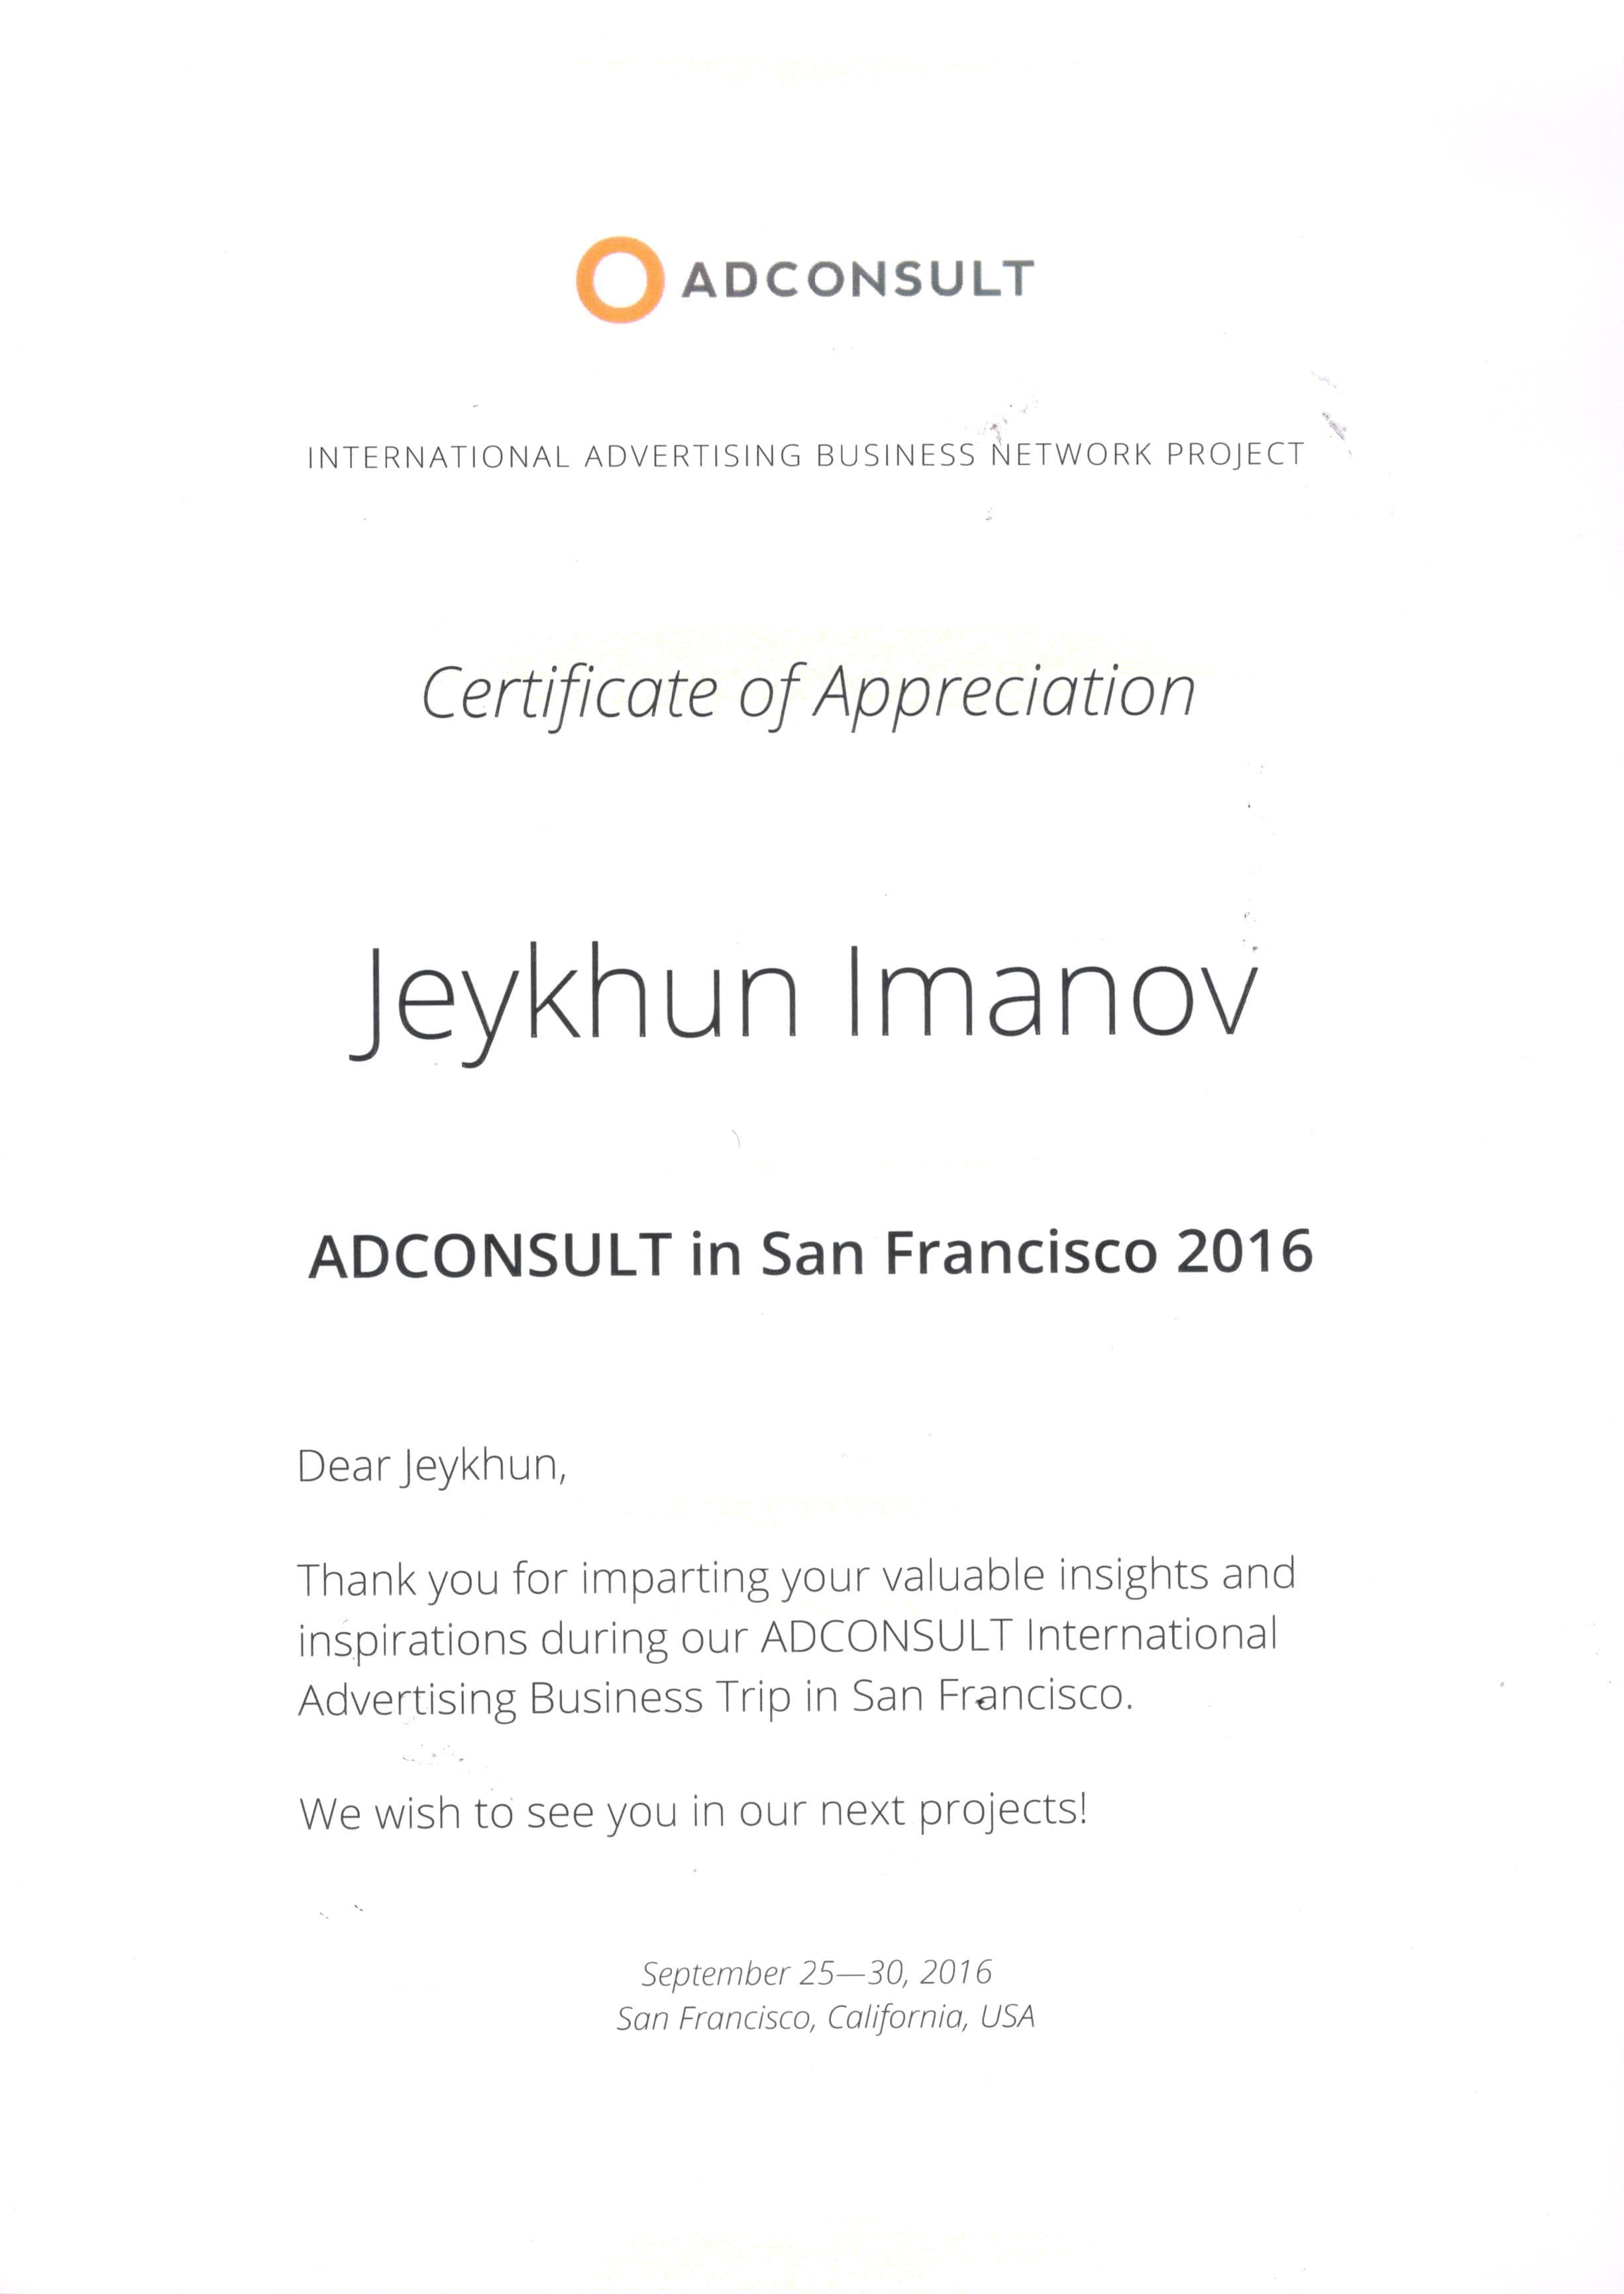 ADCONSULT in San Francisco 2016